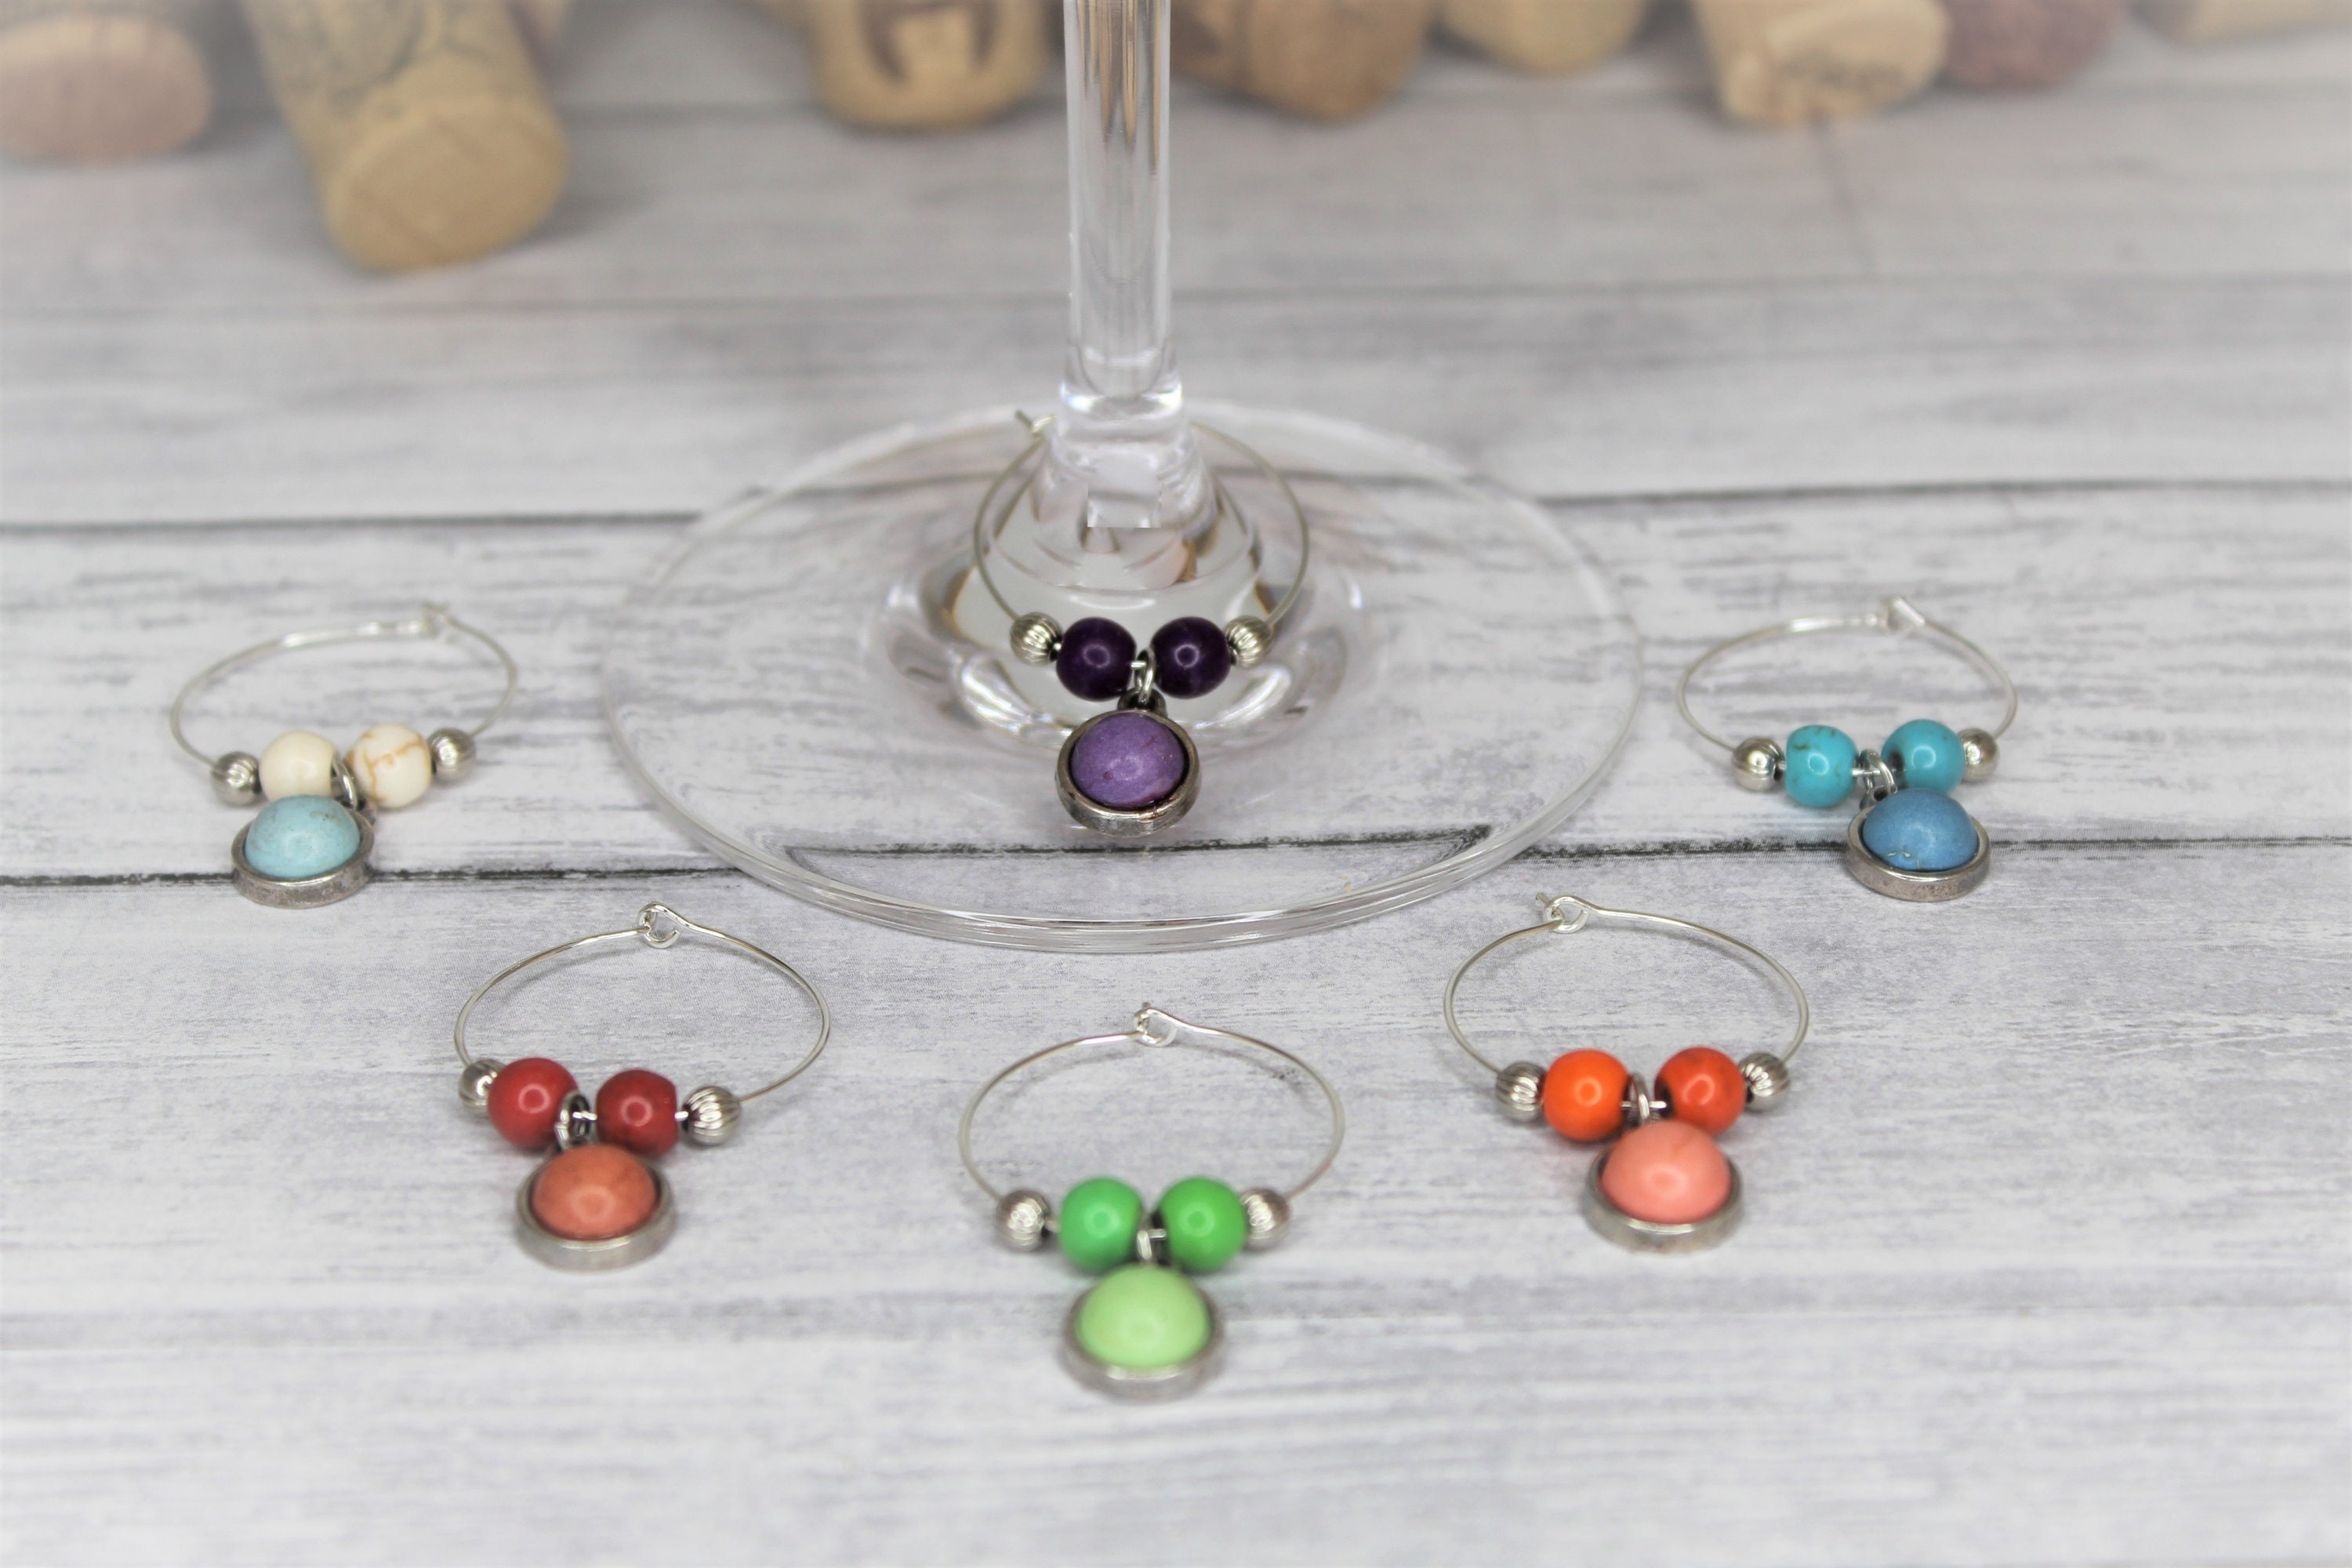 Multi-Colored Spring Wine Charms